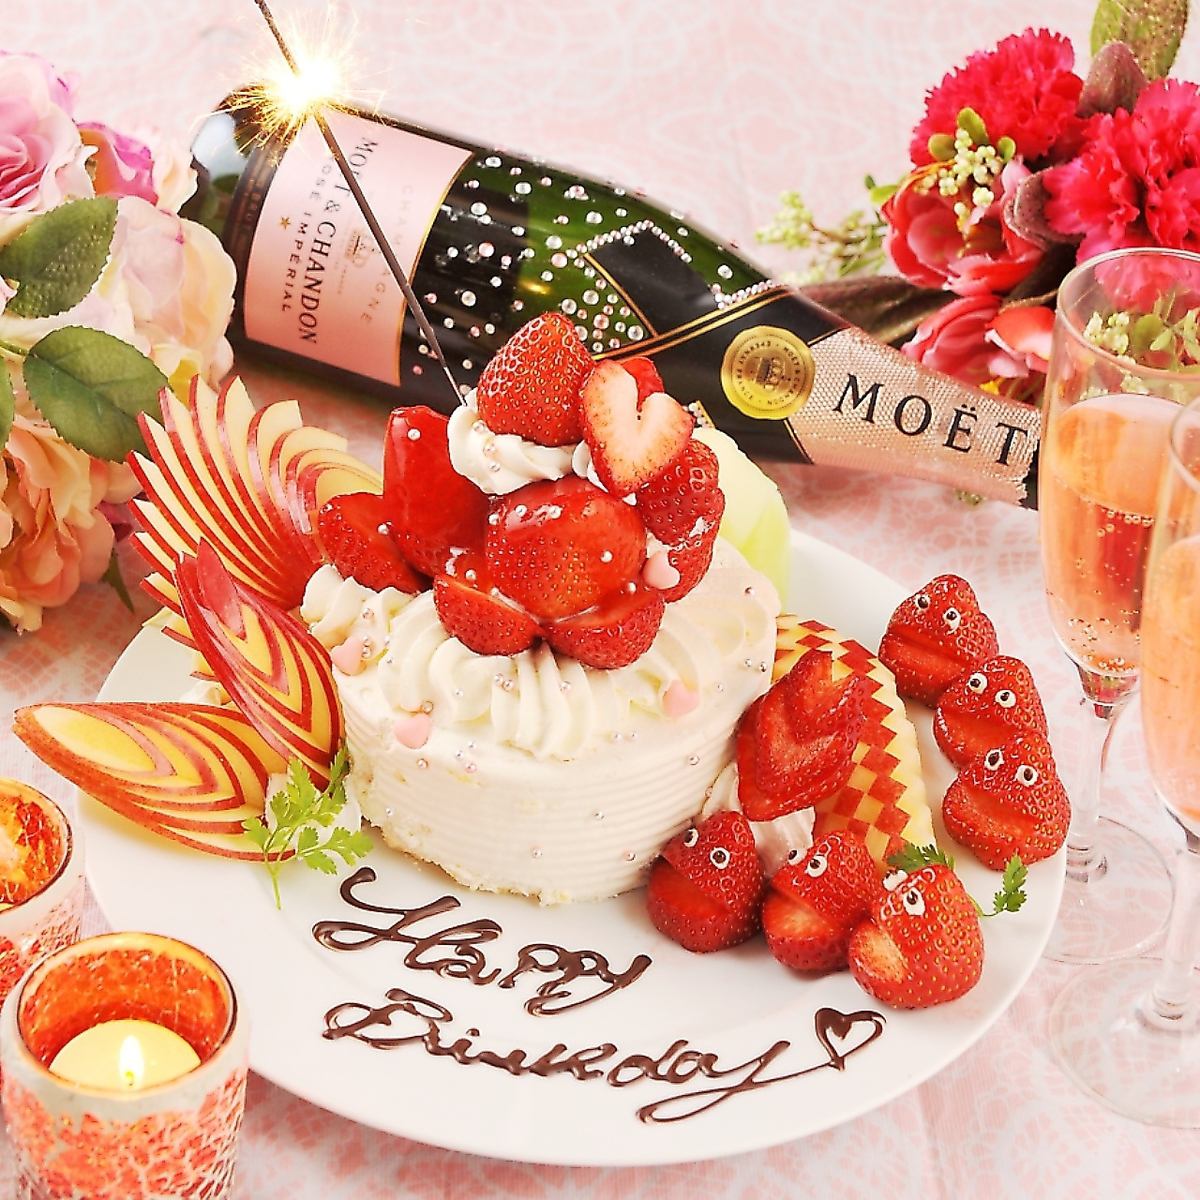 Get a free surprise plate with a coupon♪Recommended for girls-only gatherings and birthday parties★